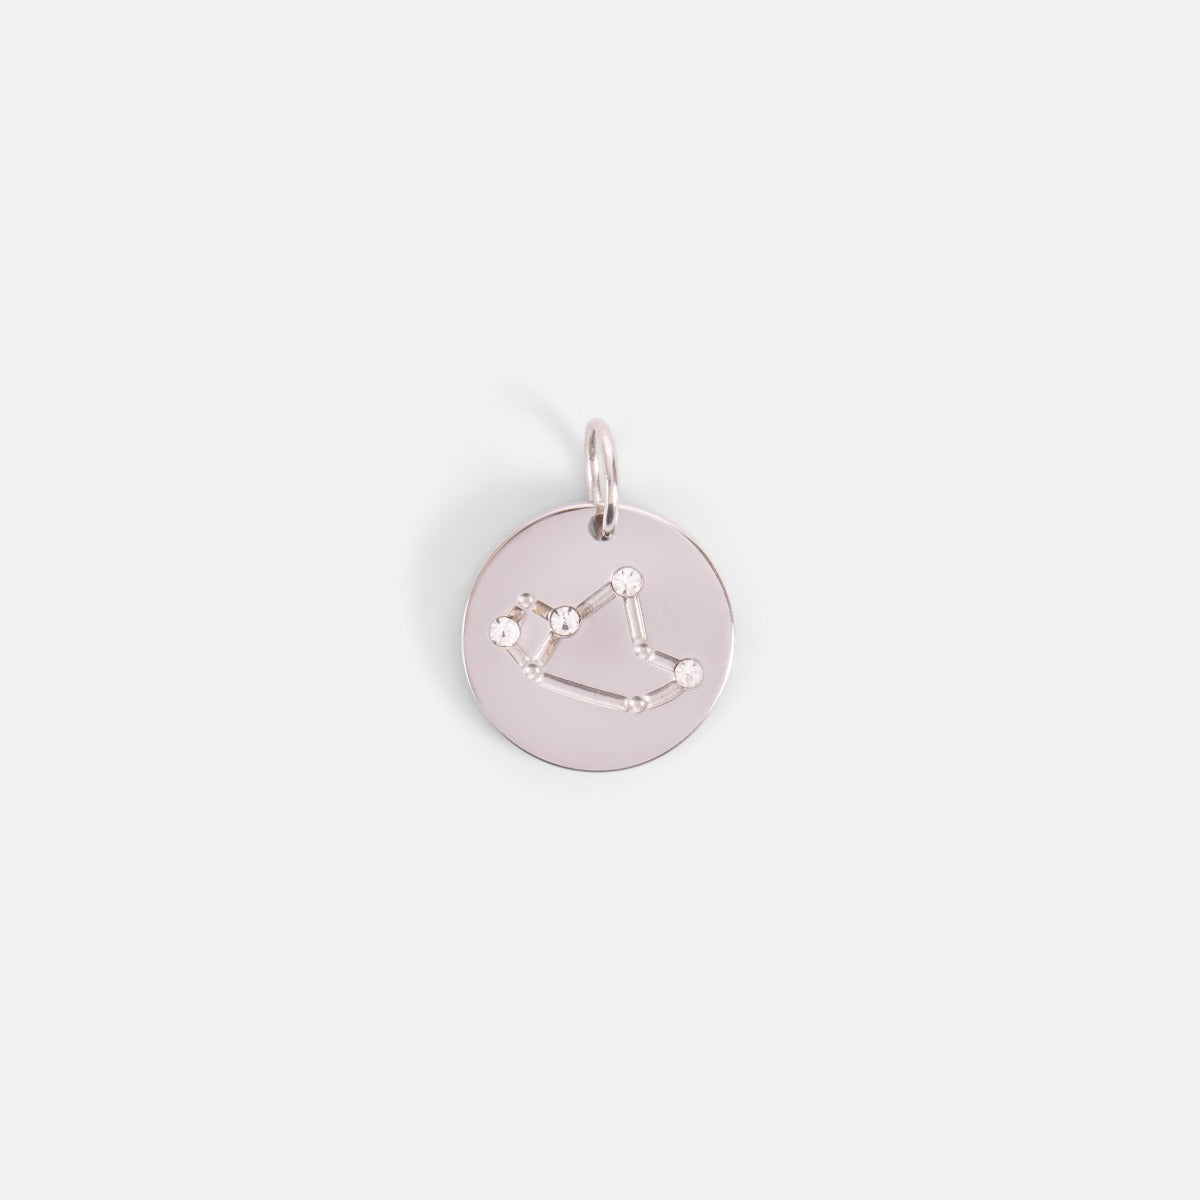 Small silvered charm engraved with the zodiac constellation "sagittarius"